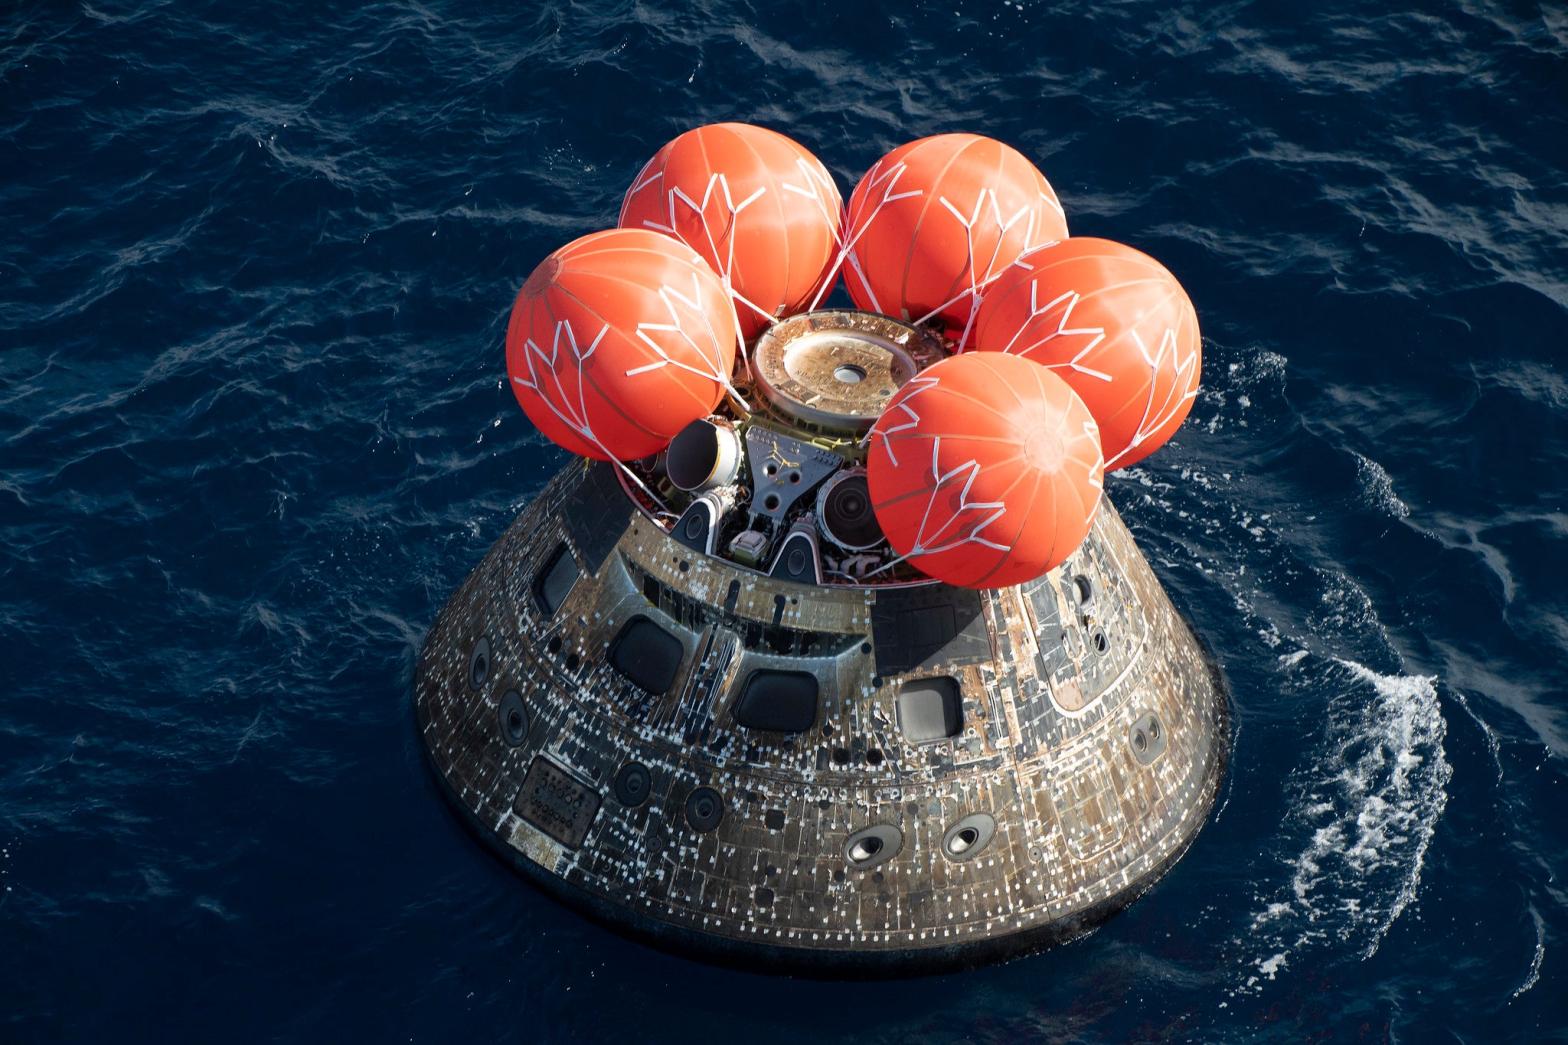 A view of NASA's Orion spacecraft shortly after splashing down in the Pacific Ocean on Sunday, December 11, 2022.  (Photo: NASA)